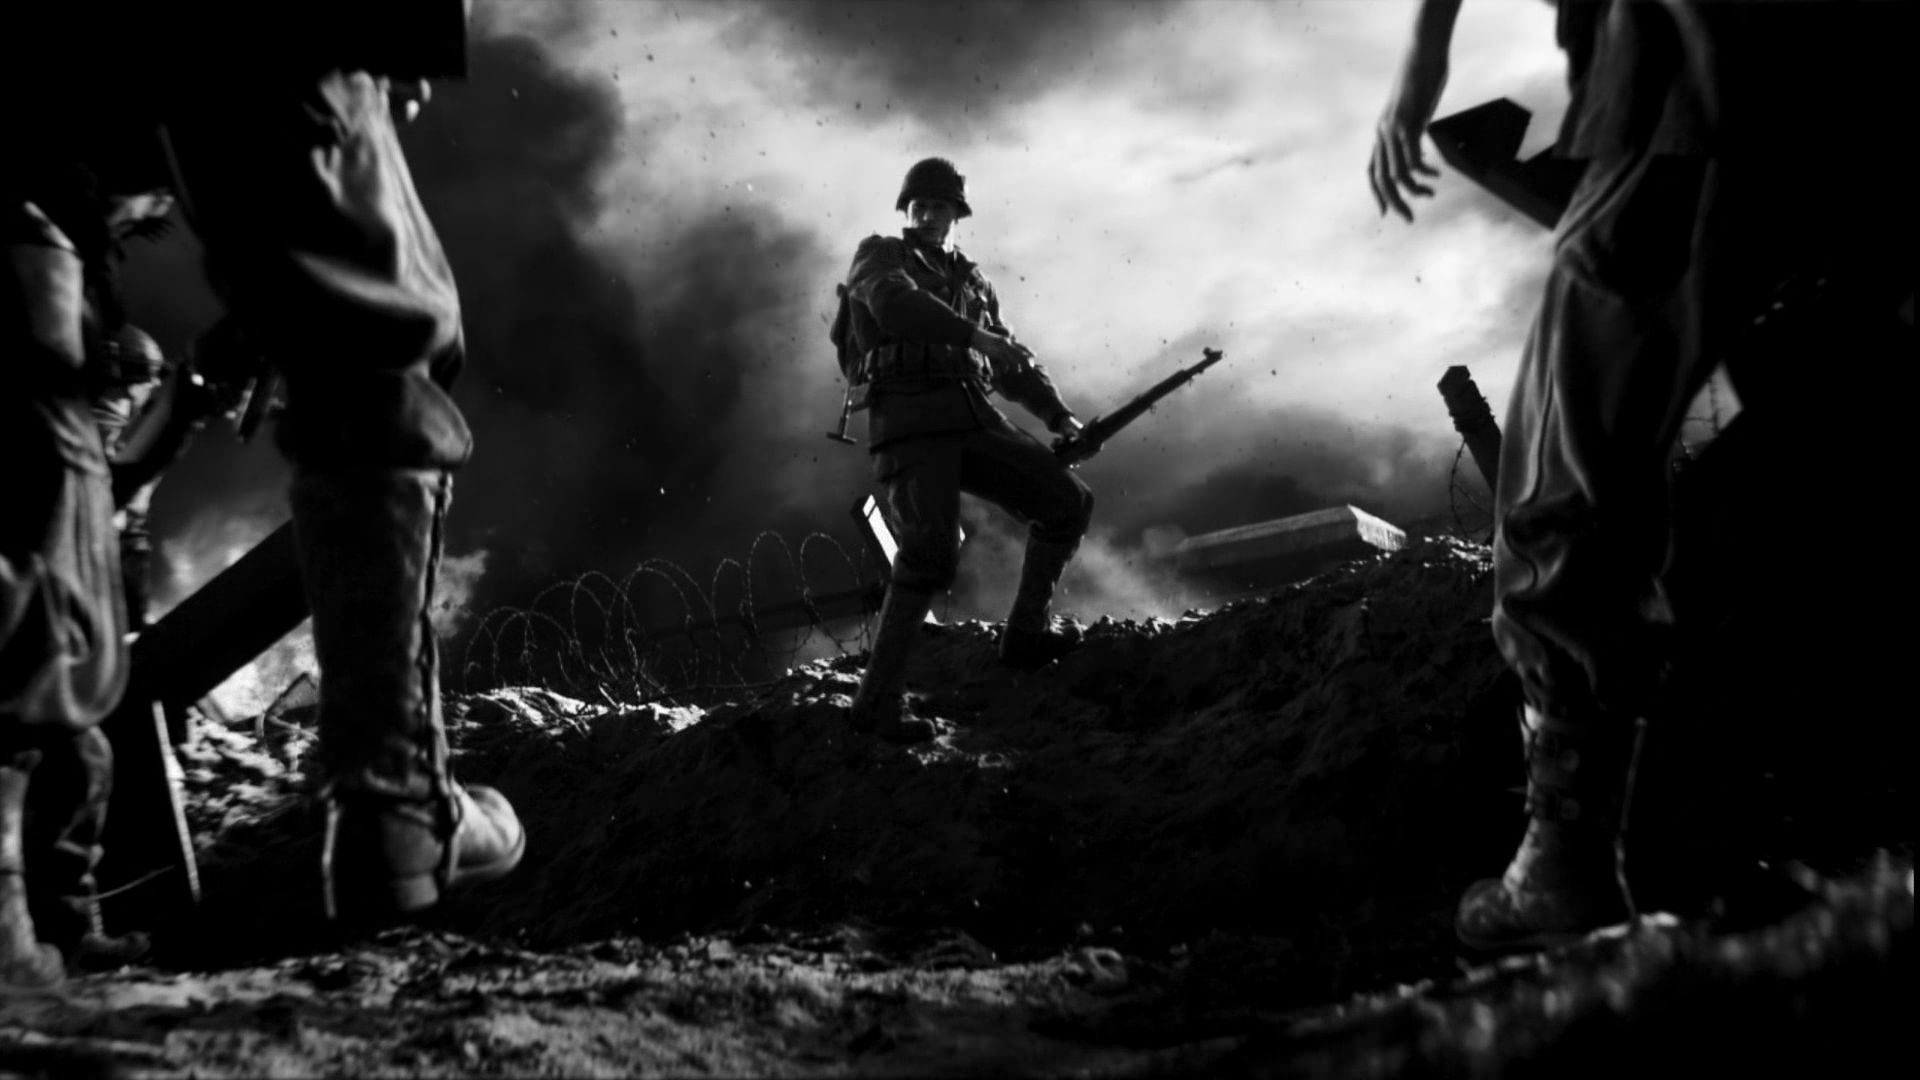 ww wallpaper,human,photography,soldier,black and white,monochrome photography